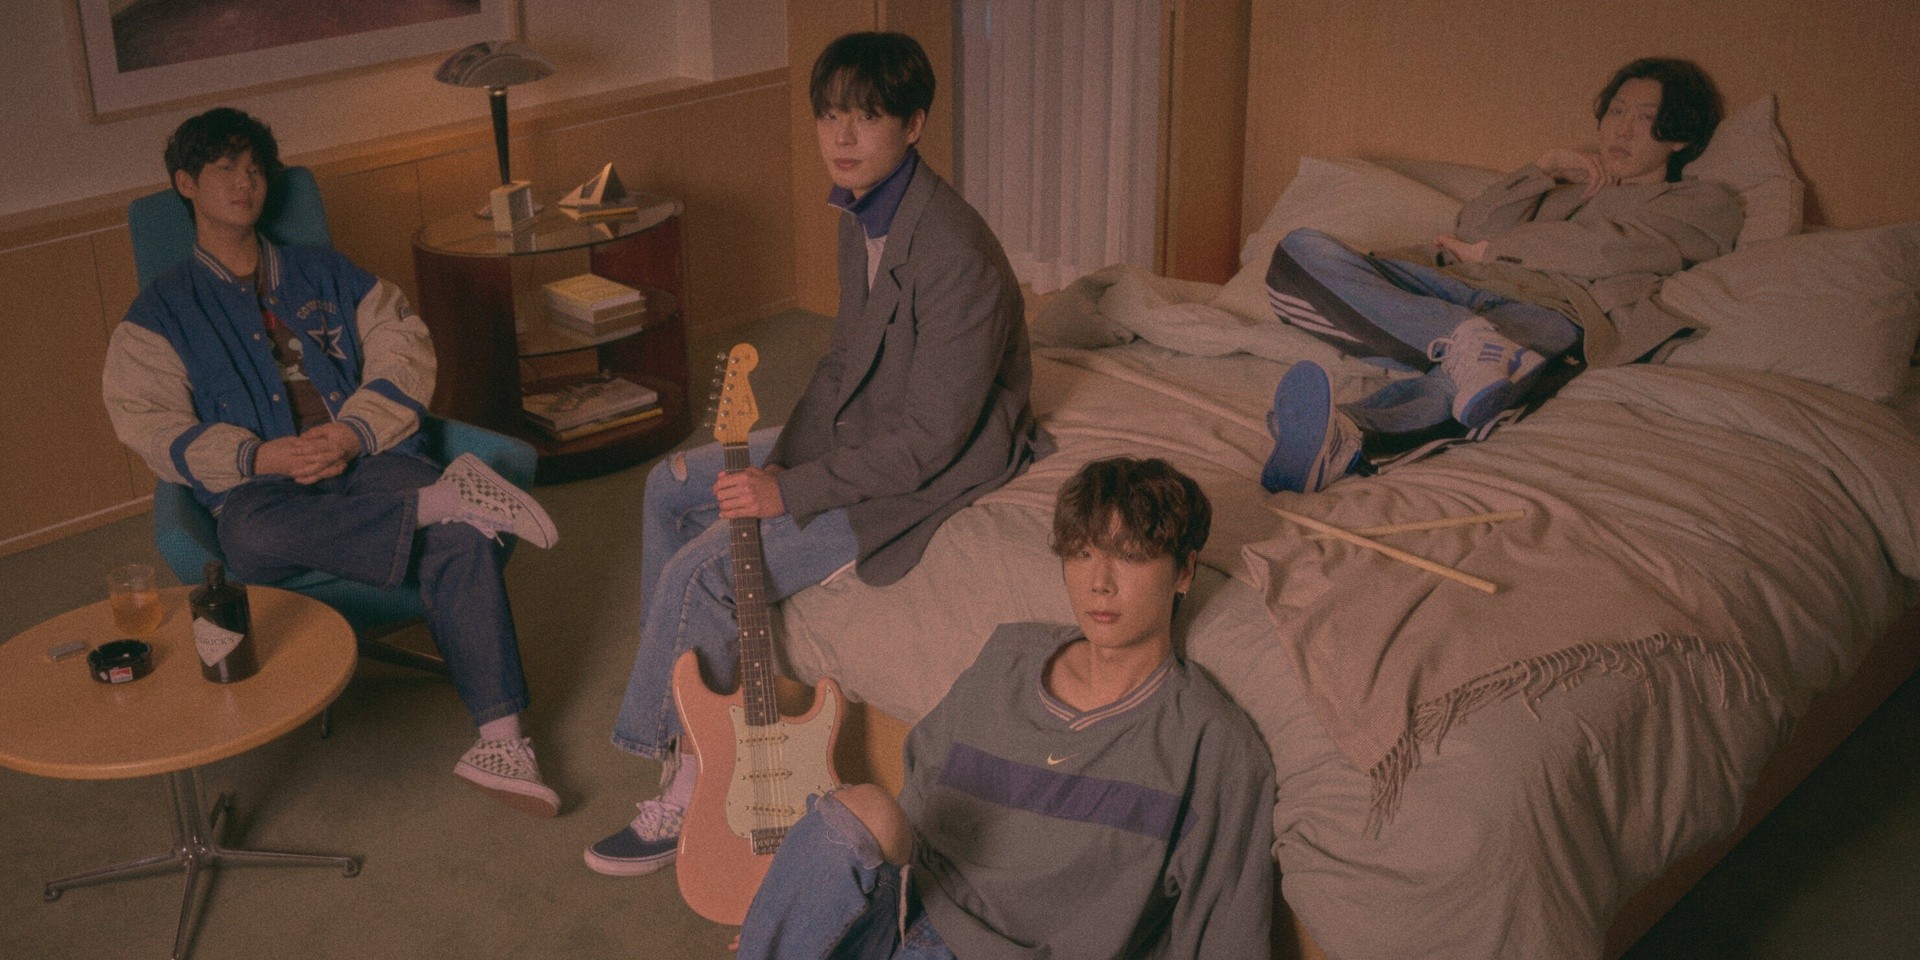 Introducing: Korean indie band Lacuna on telling playful love stories with their new EP 'Summer Tales'